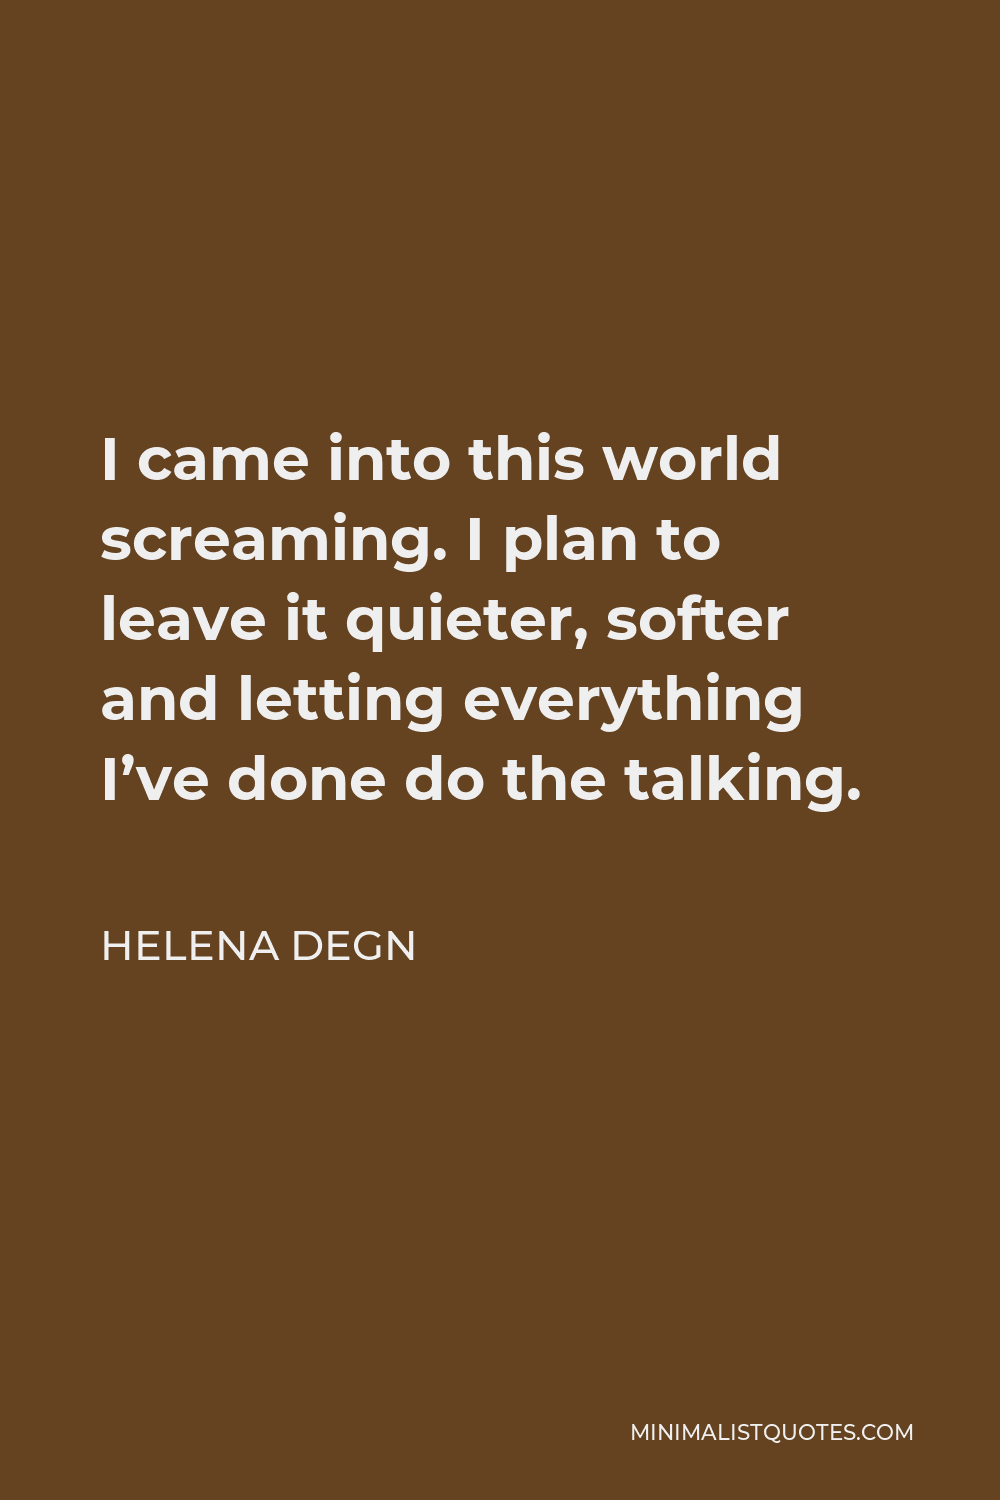 Helena Degn Quote - I came into this world screaming. I plan to leave it quieter, softer and letting everything I’ve done do the talking.